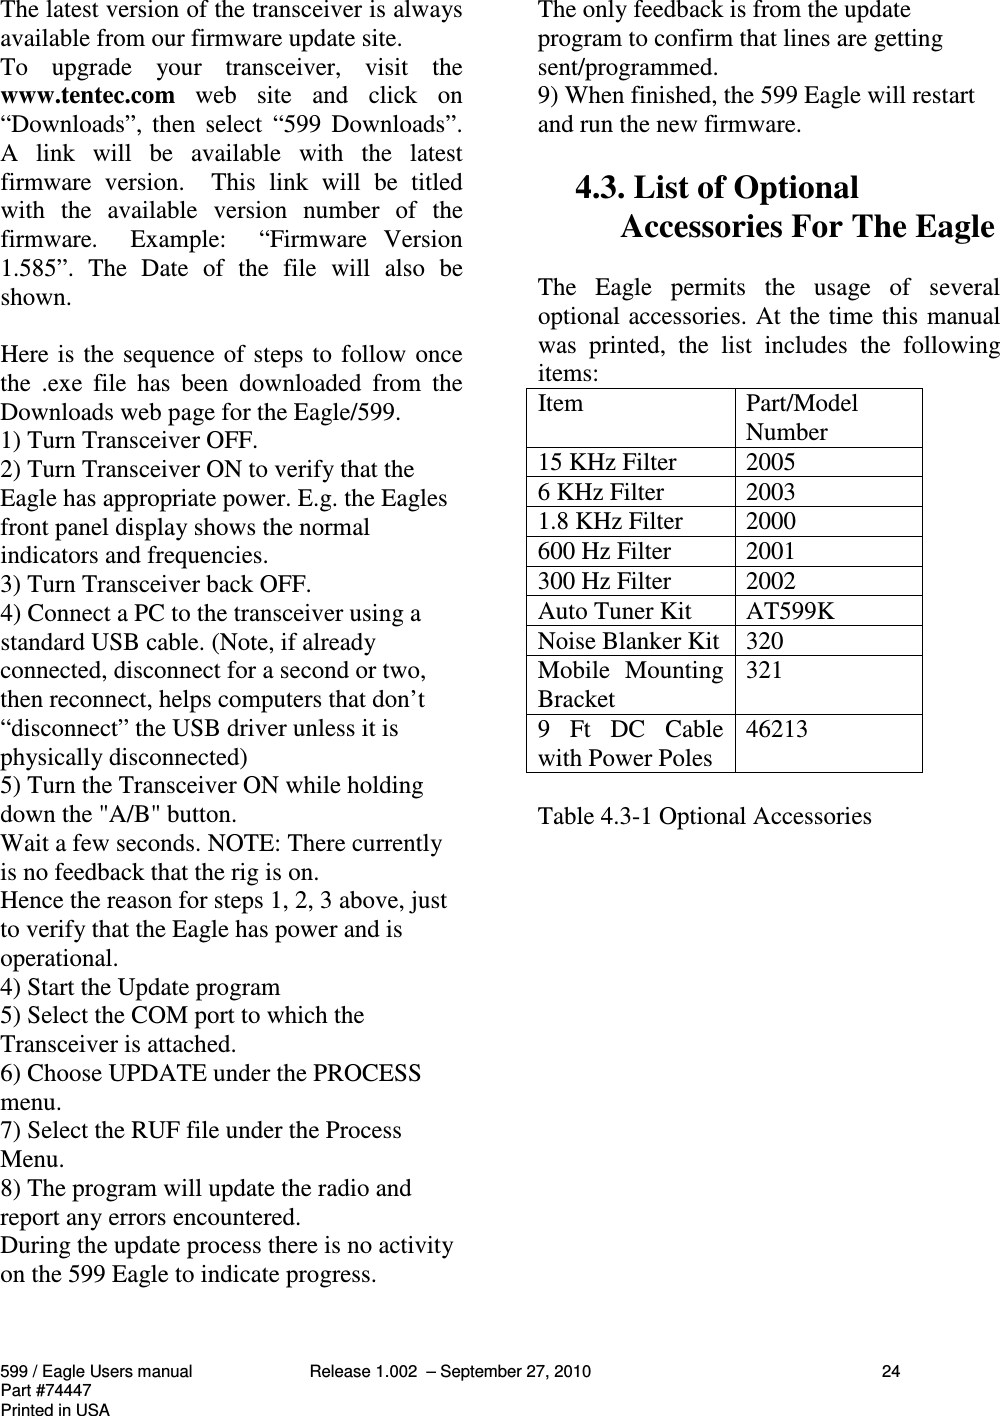 599 / Eagle Users manual Release 1.002  – September 27, 2010 24Part #74447Printed in USAThe latest version of the transceiver is alwaysavailable from our firmware update site.To  upgrade  your  transceiver,  visit  thewww.tentec.com  web  site  and  click  on“Downloads”, then  select  “599  Downloads”.A  link  will  be  available  with  the  latestfirmware  version.    This  link  will  be  titledwith  the  available  version  number  of  thefirmware.    Example:    “Firmware  Version1.585”.  The  Date  of  the  file  will  also  beshown.Here is the sequence of steps to follow oncethe  .exe  file  has  been  downloaded  from  theDownloads web page for the Eagle/599.1) Turn Transceiver OFF.2) Turn Transceiver ON to verify that theEagle has appropriate power. E.g. the Eaglesfront panel display shows the normalindicators and frequencies.3) Turn Transceiver back OFF.4) Connect a PC to the transceiver using astandard USB cable. (Note, if alreadyconnected, disconnect for a second or two,then reconnect, helps computers that don’t“disconnect” the USB driver unless it isphysically disconnected)5) Turn the Transceiver ON while holdingdown the &quot;A/B&quot; button.Wait a few seconds. NOTE: There currentlyis no feedback that the rig is on.Hence the reason for steps 1, 2, 3 above, justto verify that the Eagle has power and isoperational.4) Start the Update program5) Select the COM port to which theTransceiver is attached.6) Choose UPDATE under the PROCESSmenu.7) Select the RUF file under the ProcessMenu.8) The program will update the radio andreport any errors encountered.During the update process there is no activityon the 599 Eagle to indicate progress.The only feedback is from the updateprogram to confirm that lines are gettingsent/programmed.9) When finished, the 599 Eagle will restartand run the new firmware.4.3. List of OptionalAccessories For The EagleThe  Eagle  permits  the  usage  of  severaloptional accessories. At the time this manualwas  printed,  the  list  includes  the  followingitems:Item Part/ModelNumber15 KHz Filter 20056 KHz Filter 20031.8 KHz Filter 2000600 Hz Filter 2001300 Hz Filter 2002Auto Tuner Kit AT599KNoise Blanker Kit 320Mobile  MountingBracket 3219  Ft  DC  Cablewith Power Poles 46213Table 4.3-1 Optional Accessories